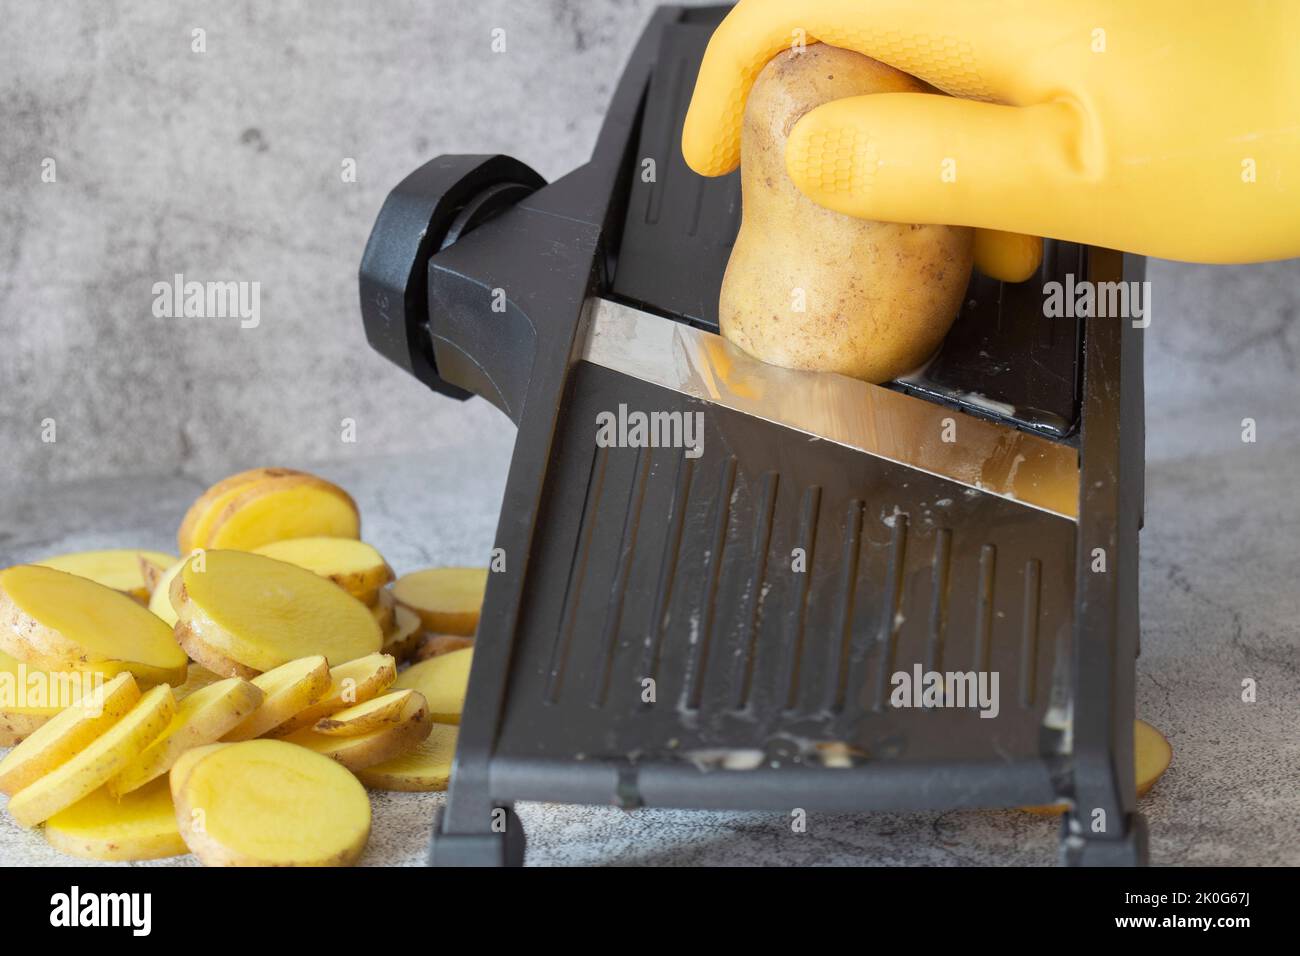 8,136 Mandoline Slicer Images, Stock Photos, 3D objects, & Vectors